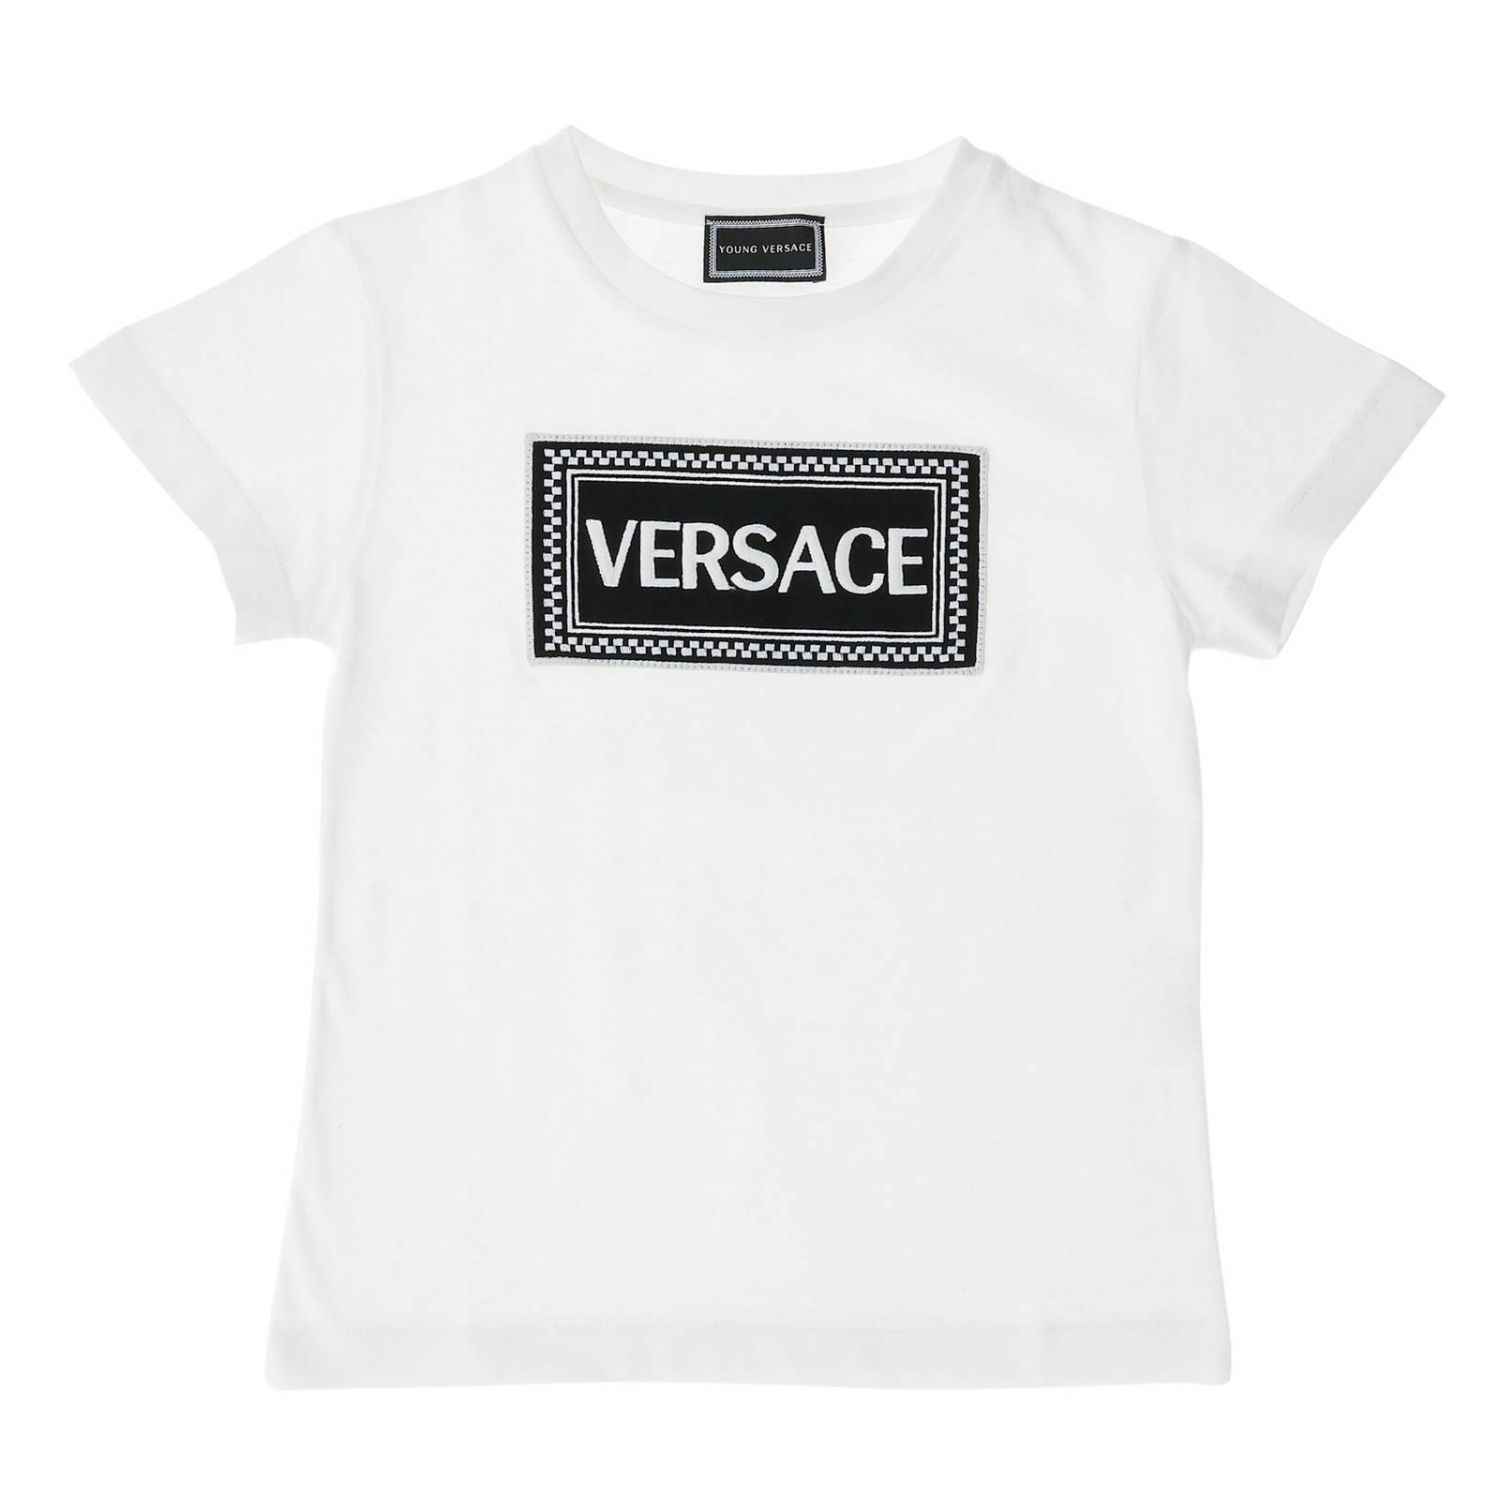 Young Versace Outlet: t-shirt for girls - White | Young Versace t-shirt ...